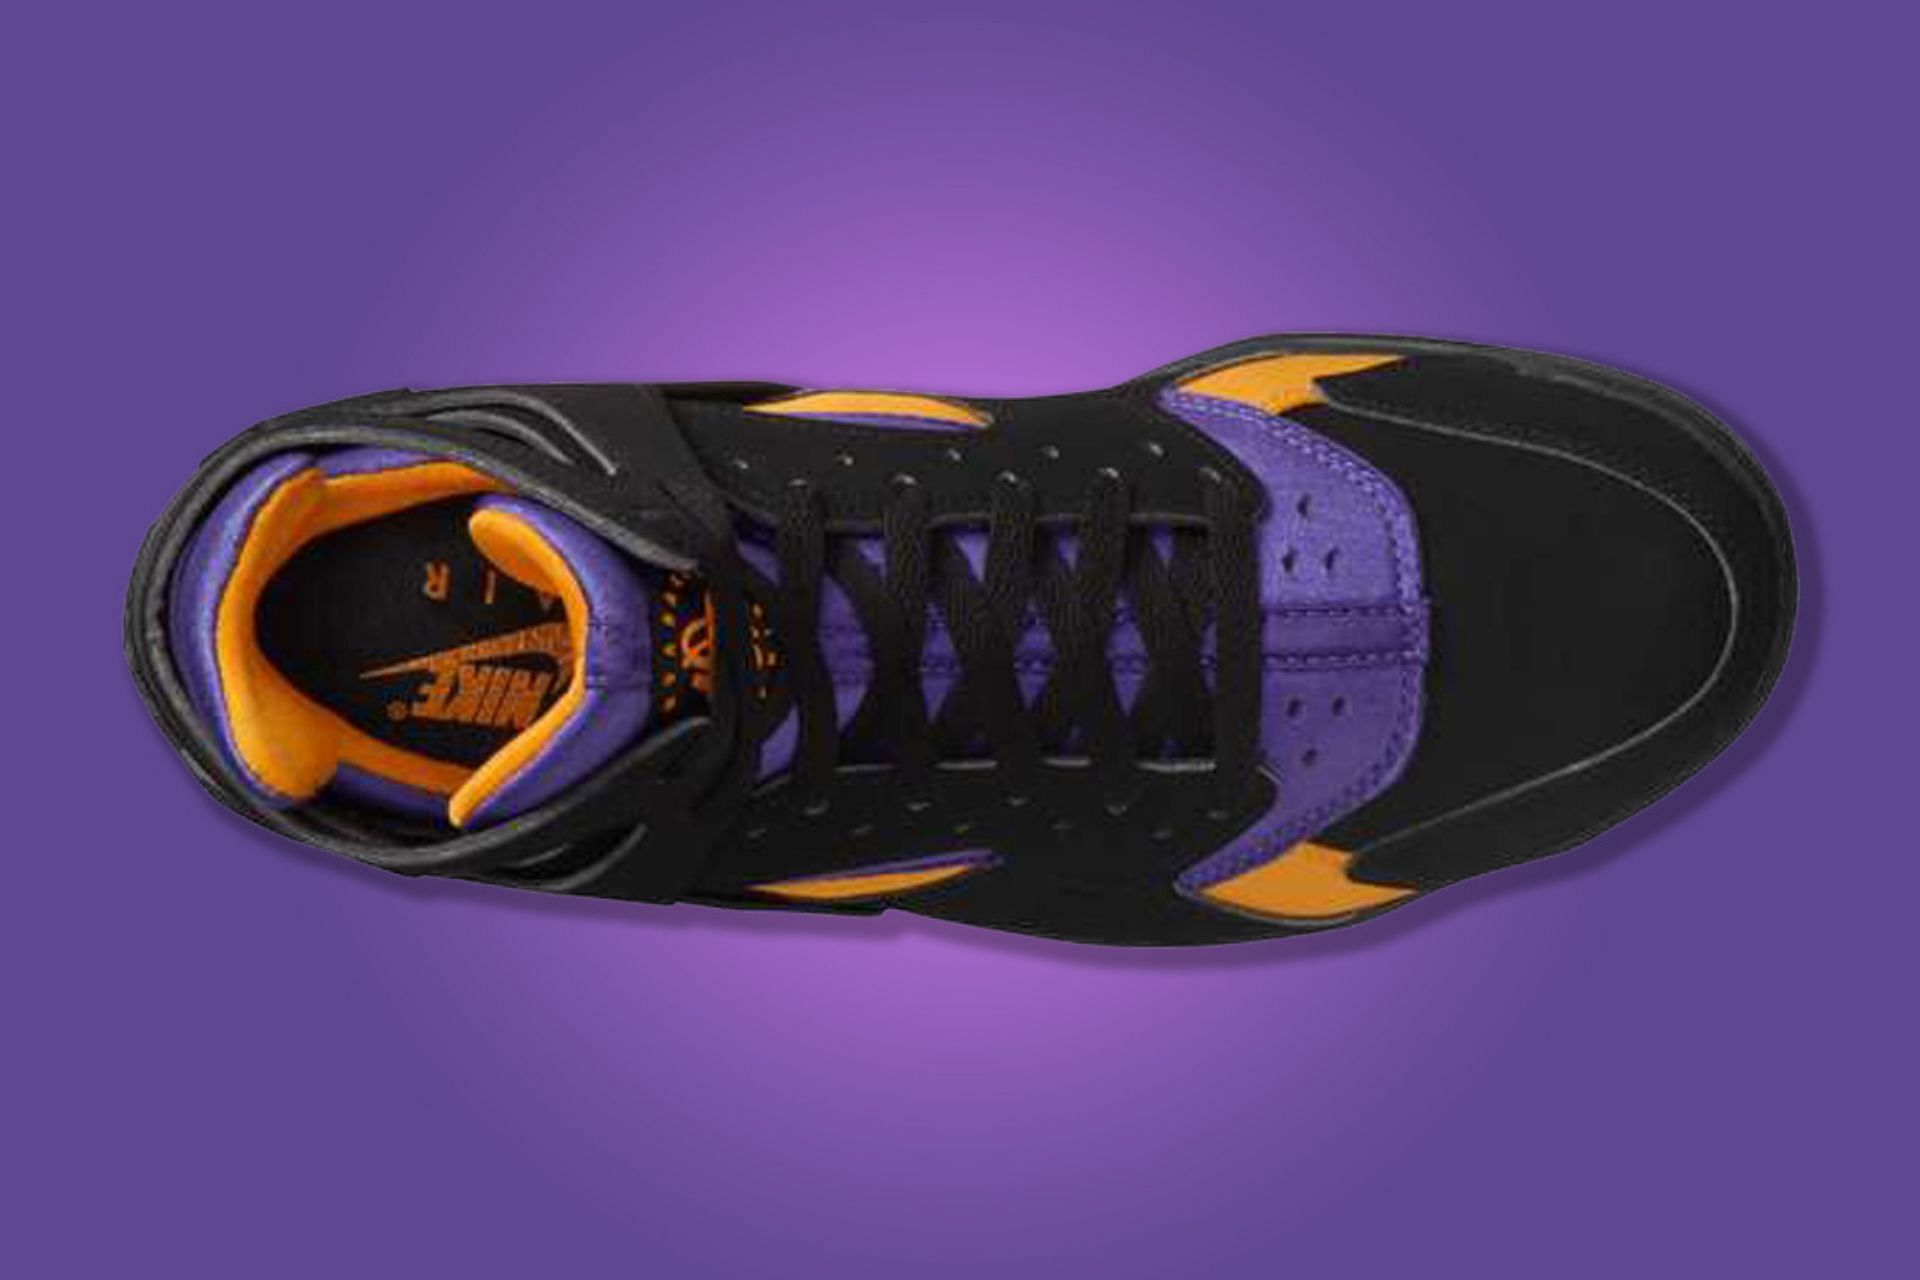 Take a look a the uppers of these sneakers (Image via Nike)